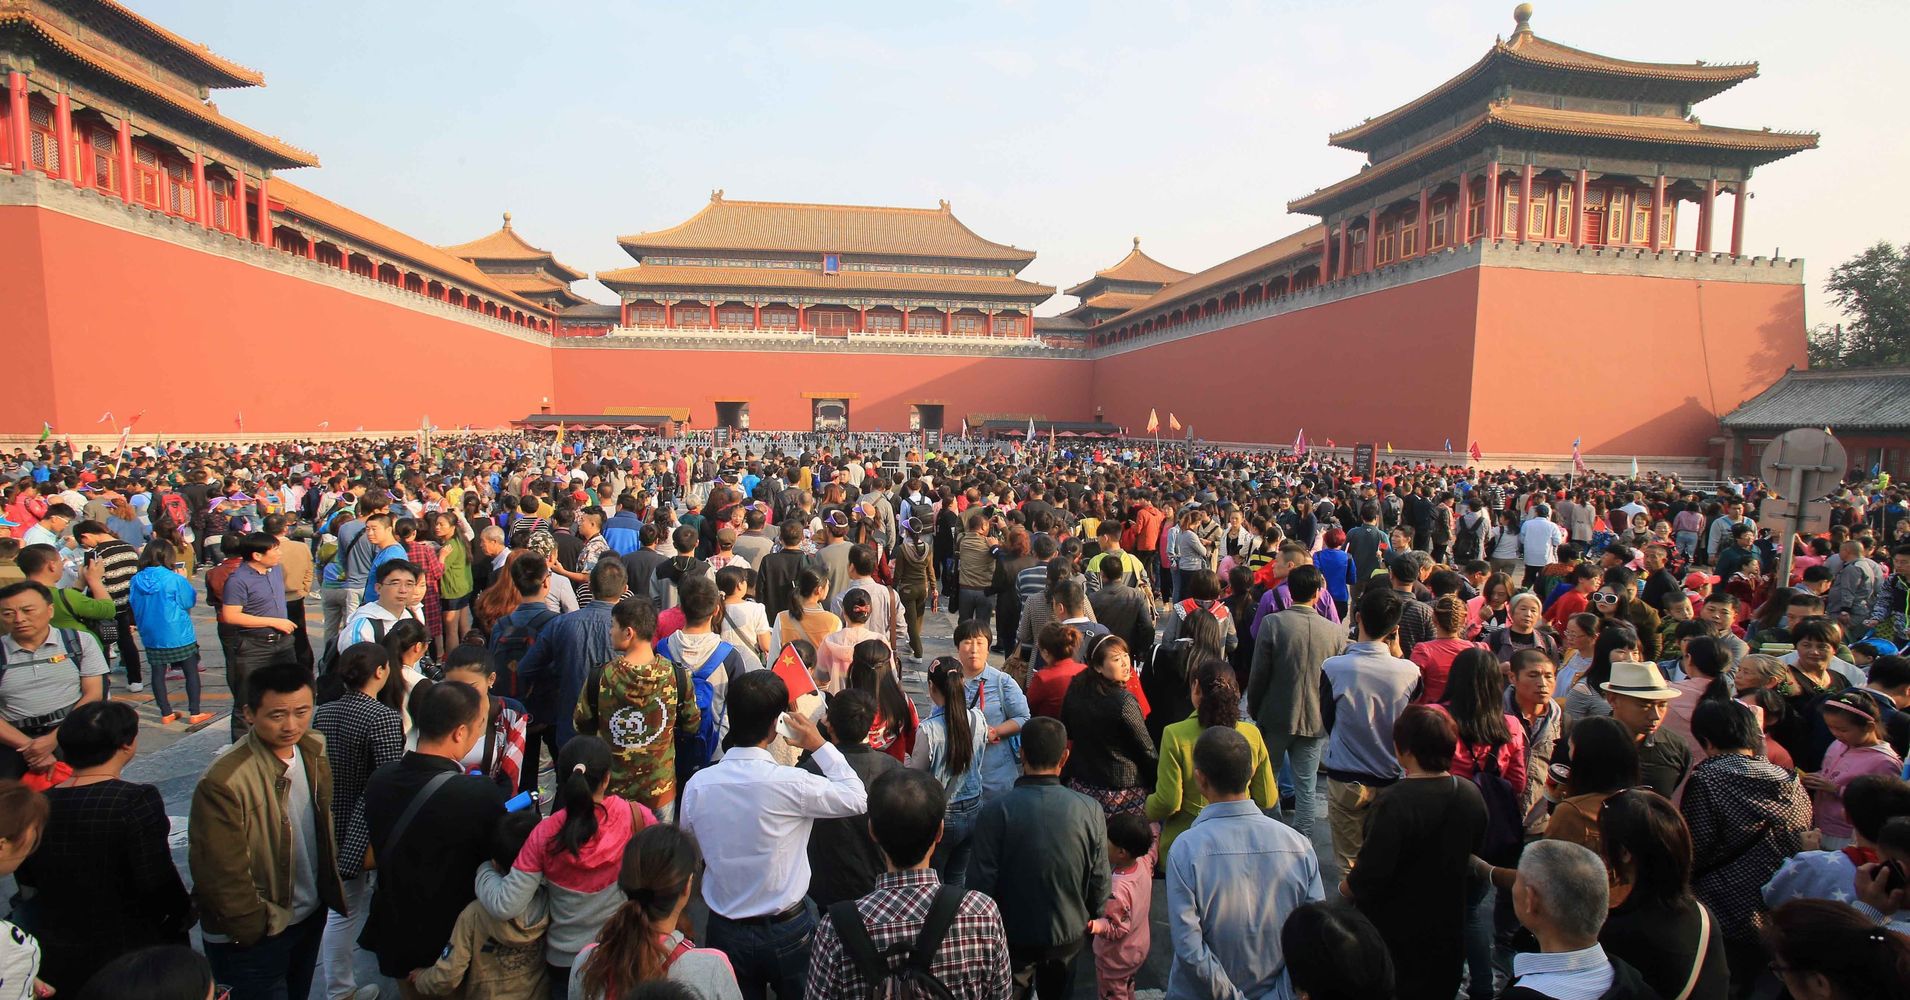 These Photos Show When Not To Visit China If You Don't Like Crowds | HuffPost